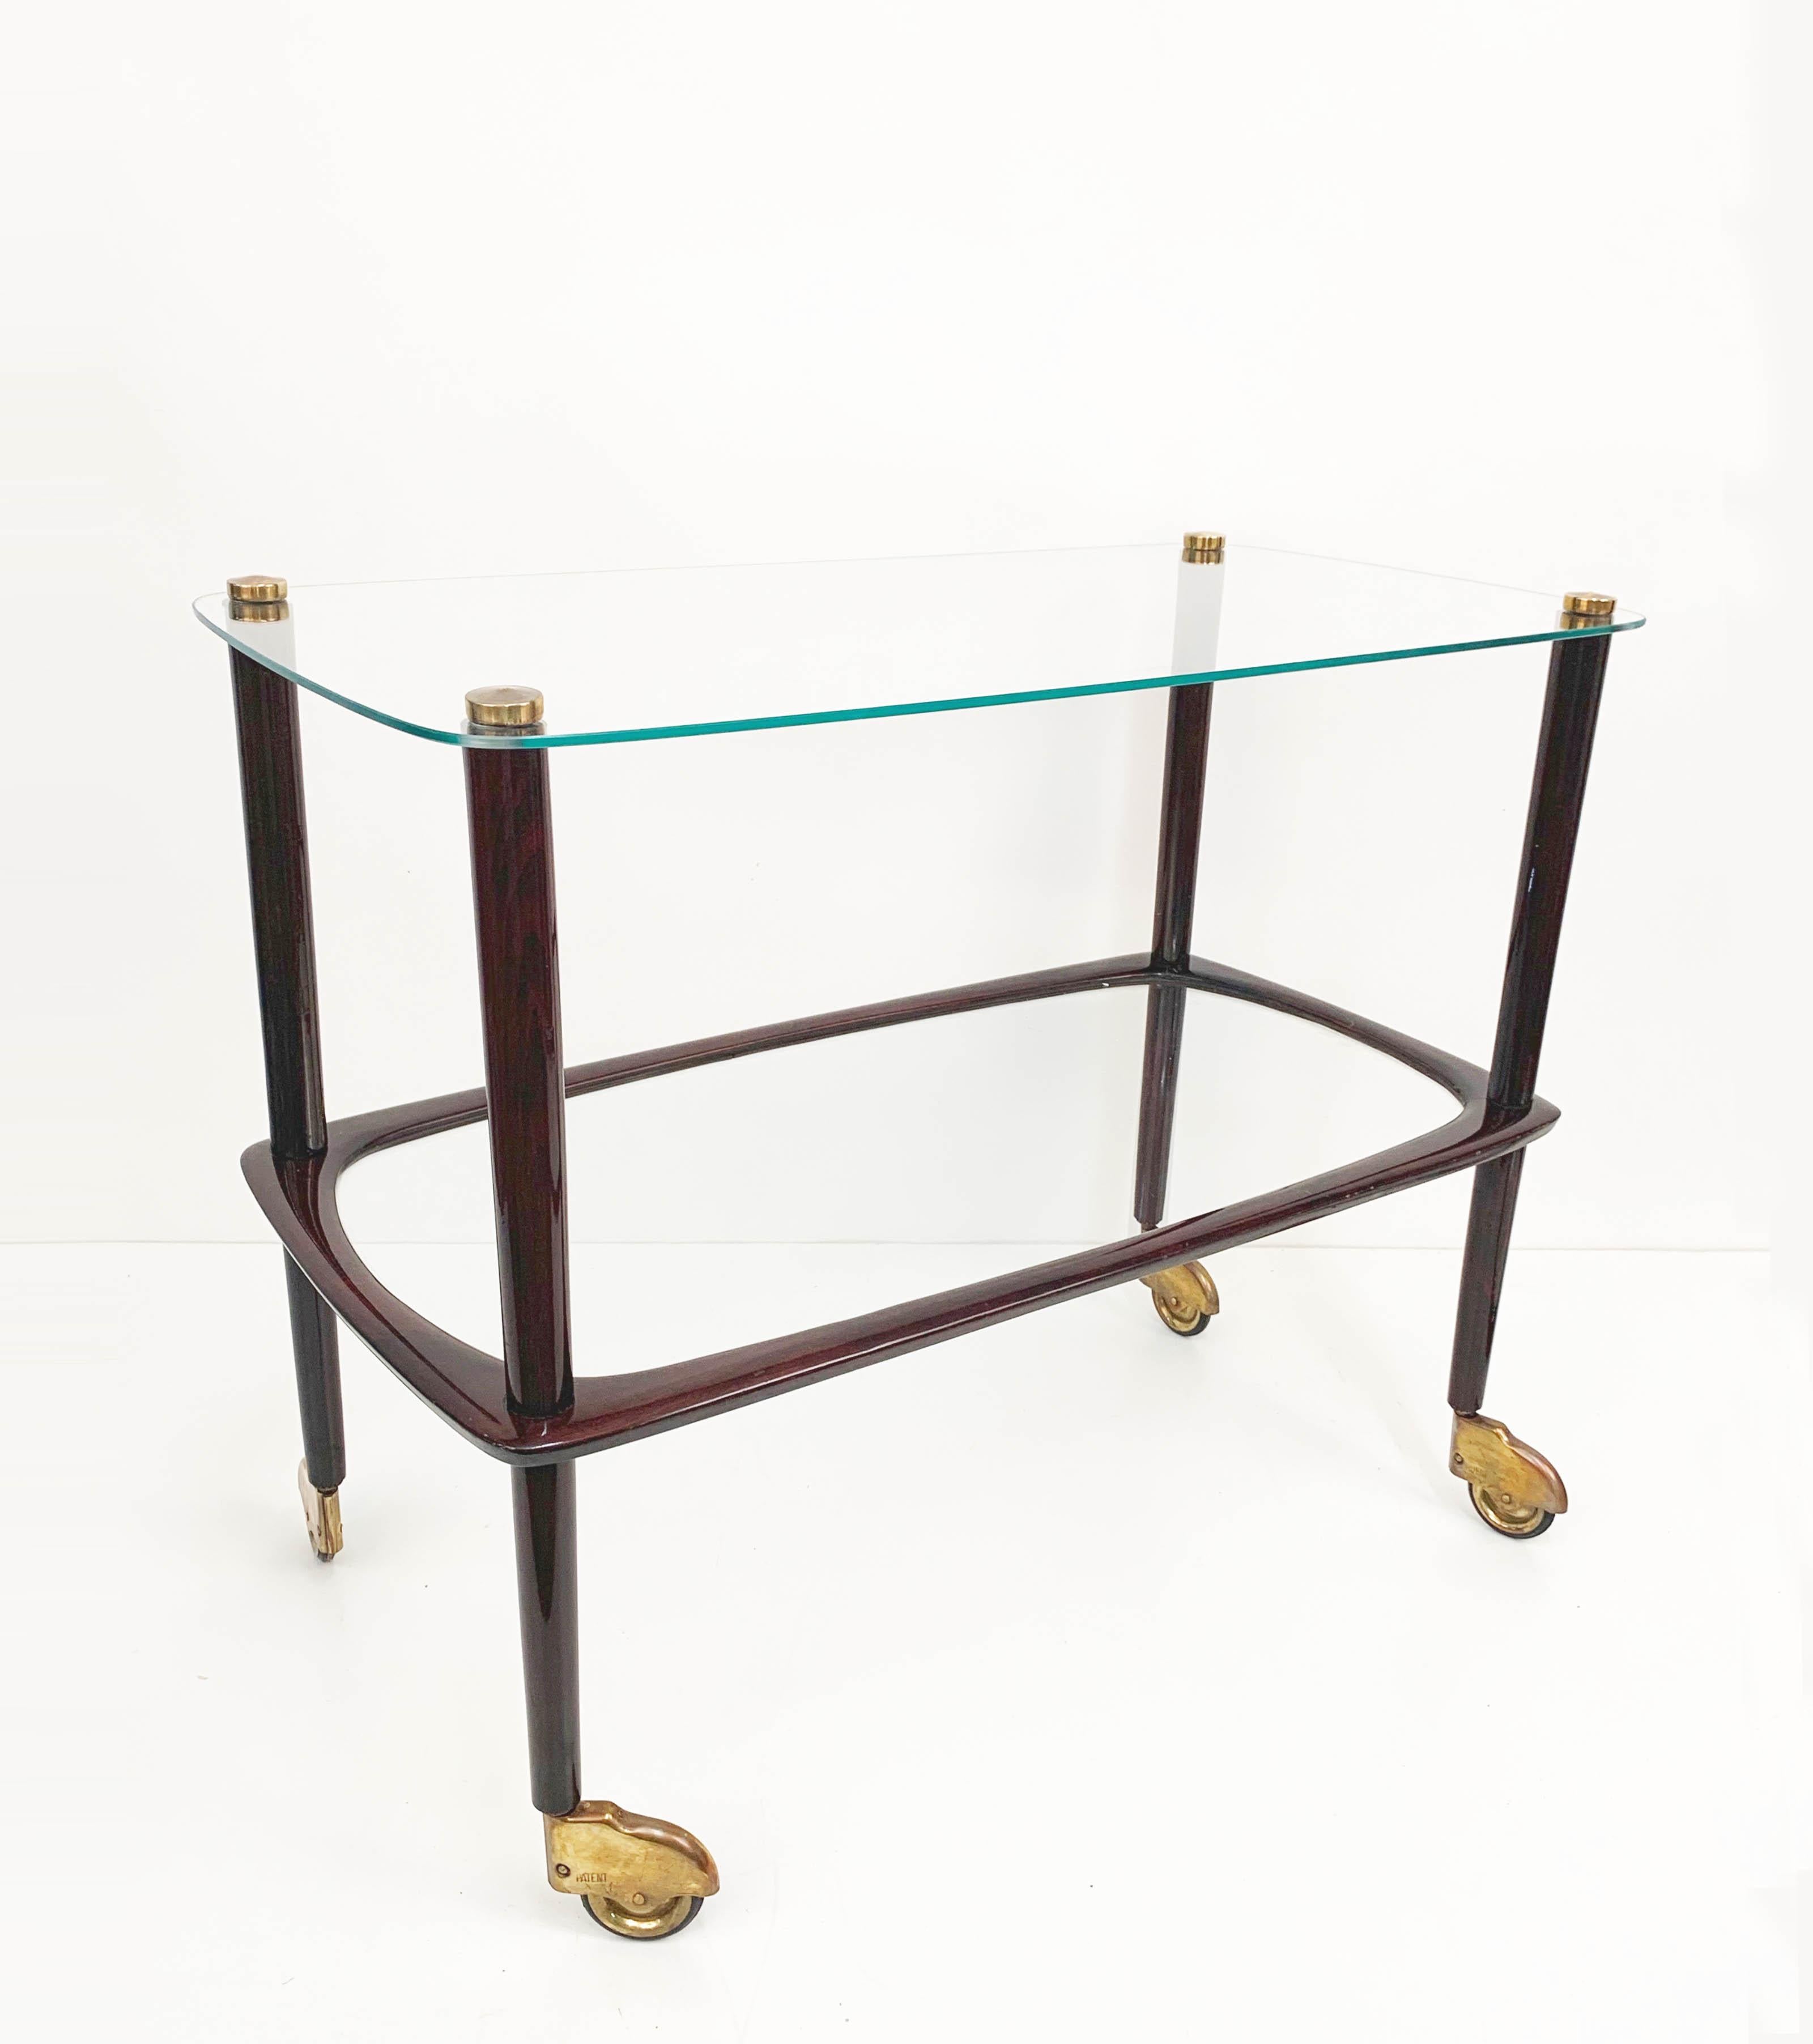 Midcentury Cesare Lacca Wood Italian Bar Cart with Glass Serving Tray, 1950s For Sale 5